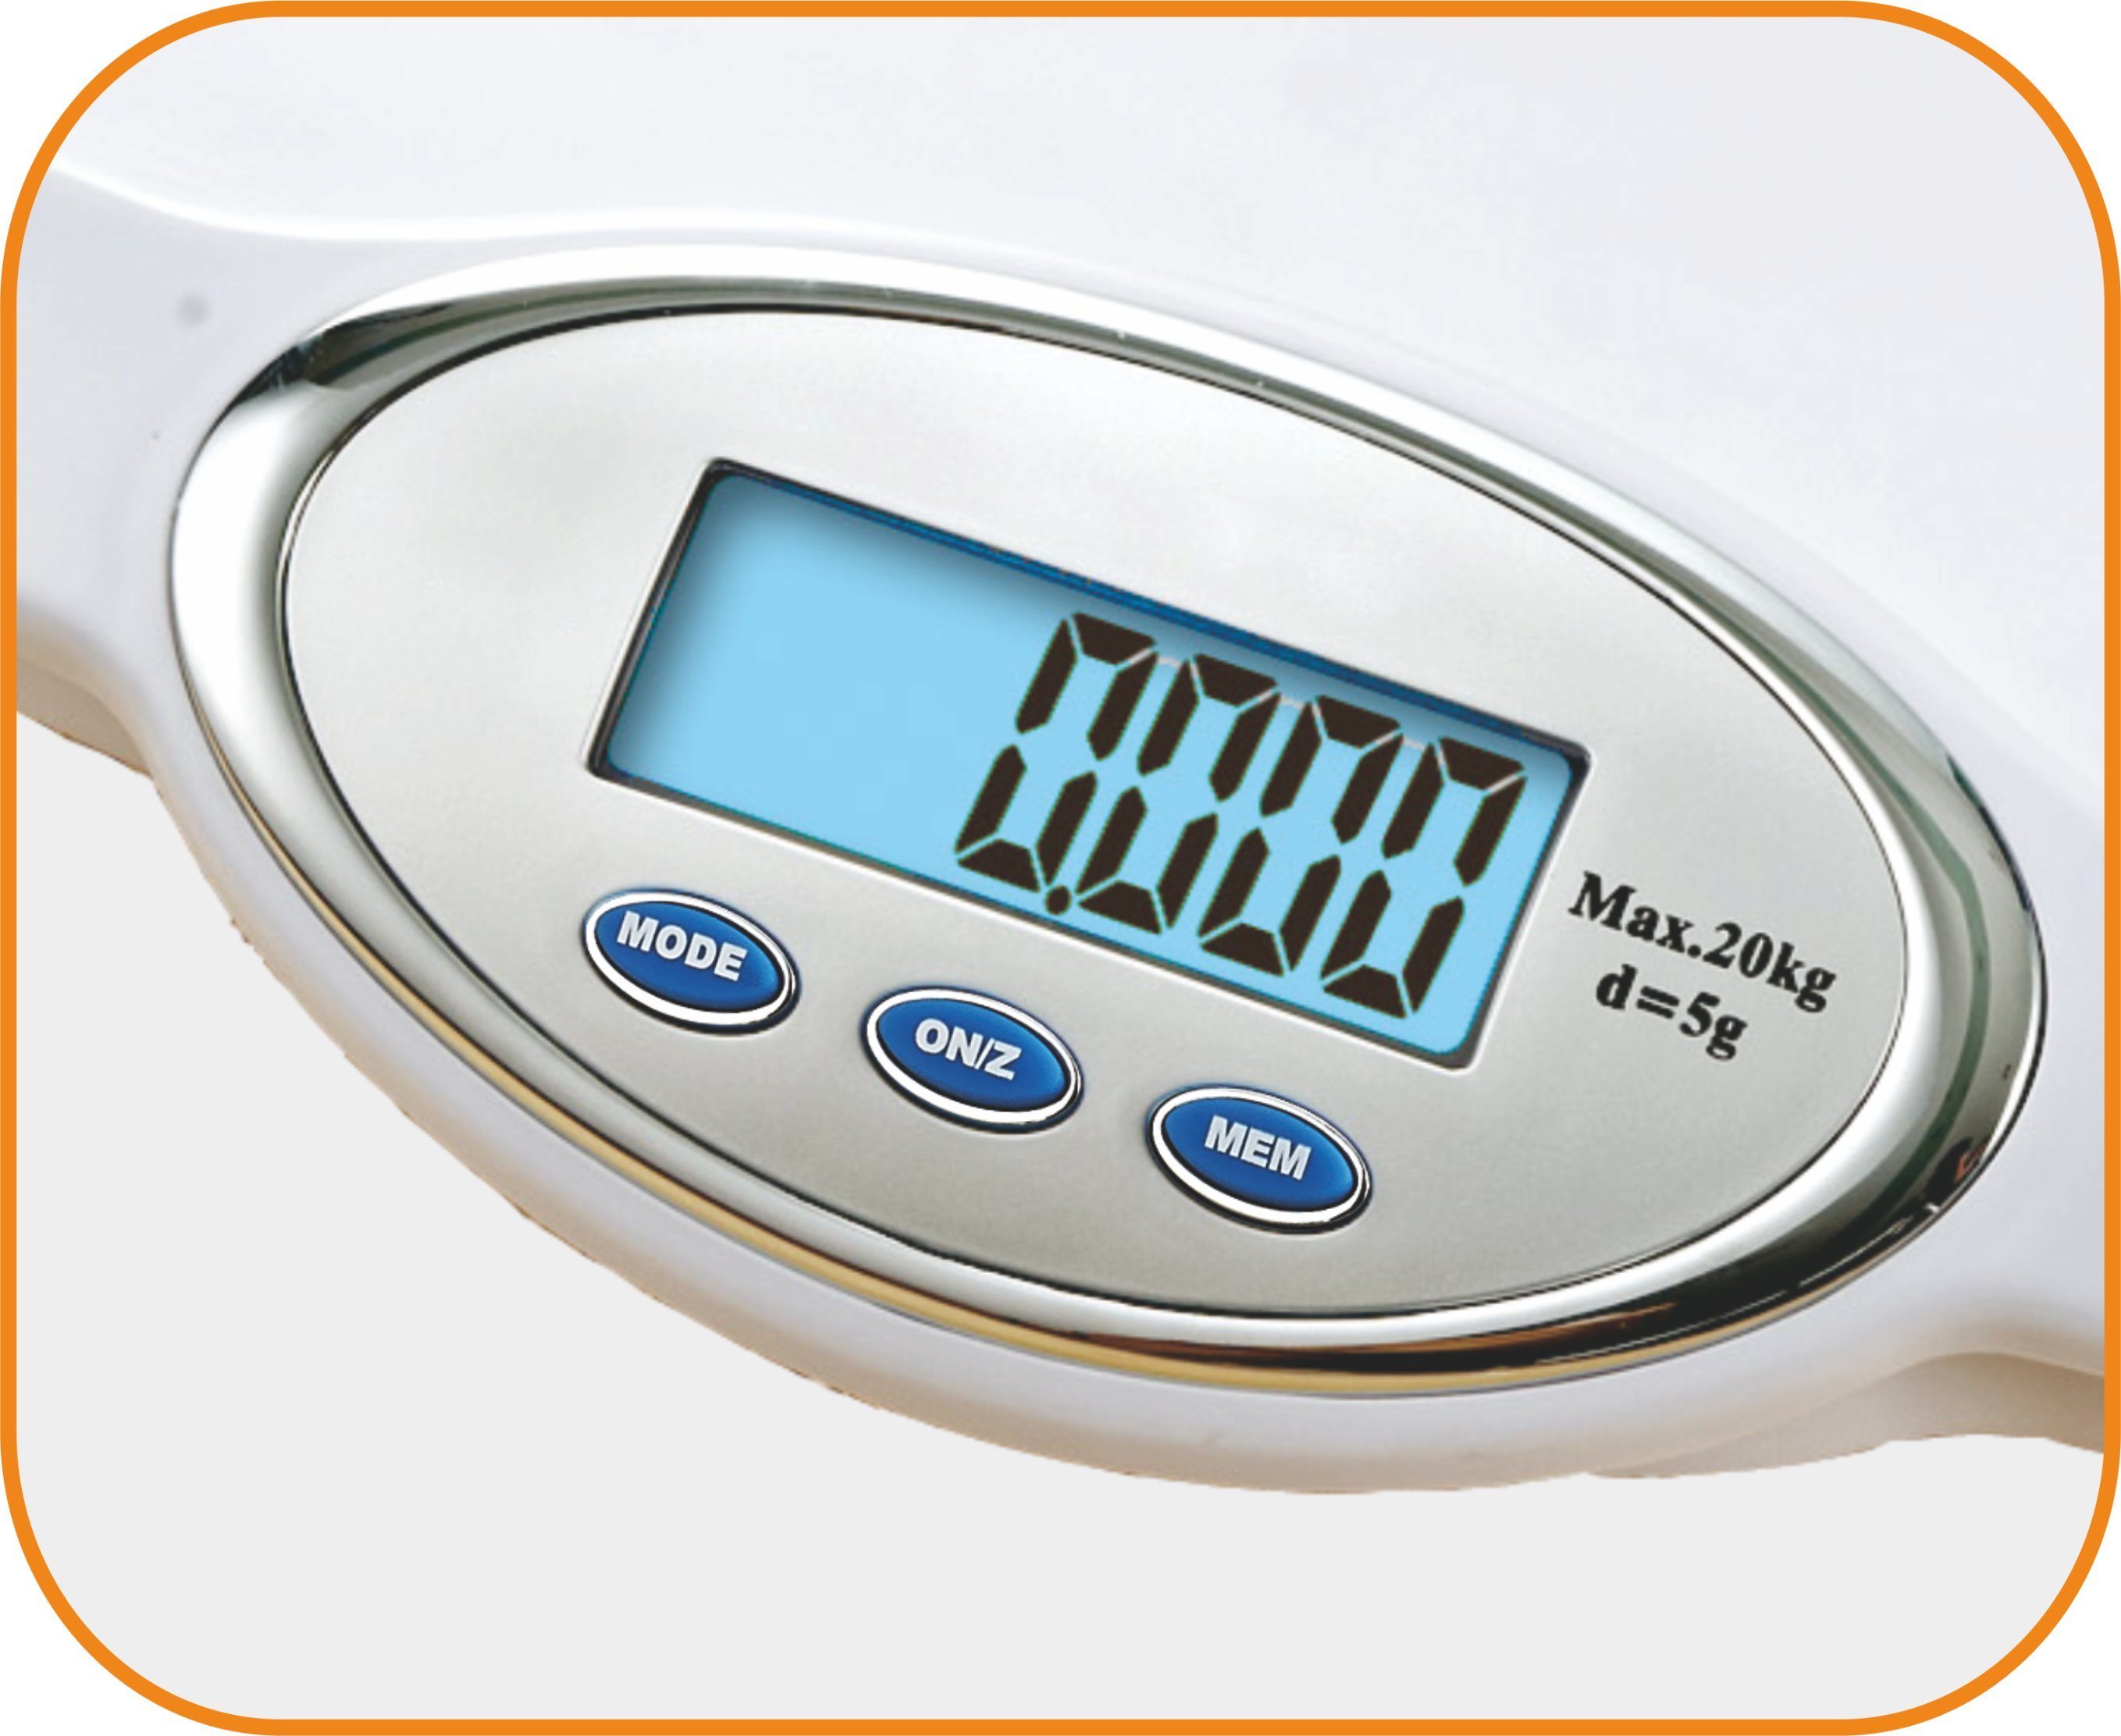 MS-B350 Electronic Infant Scales